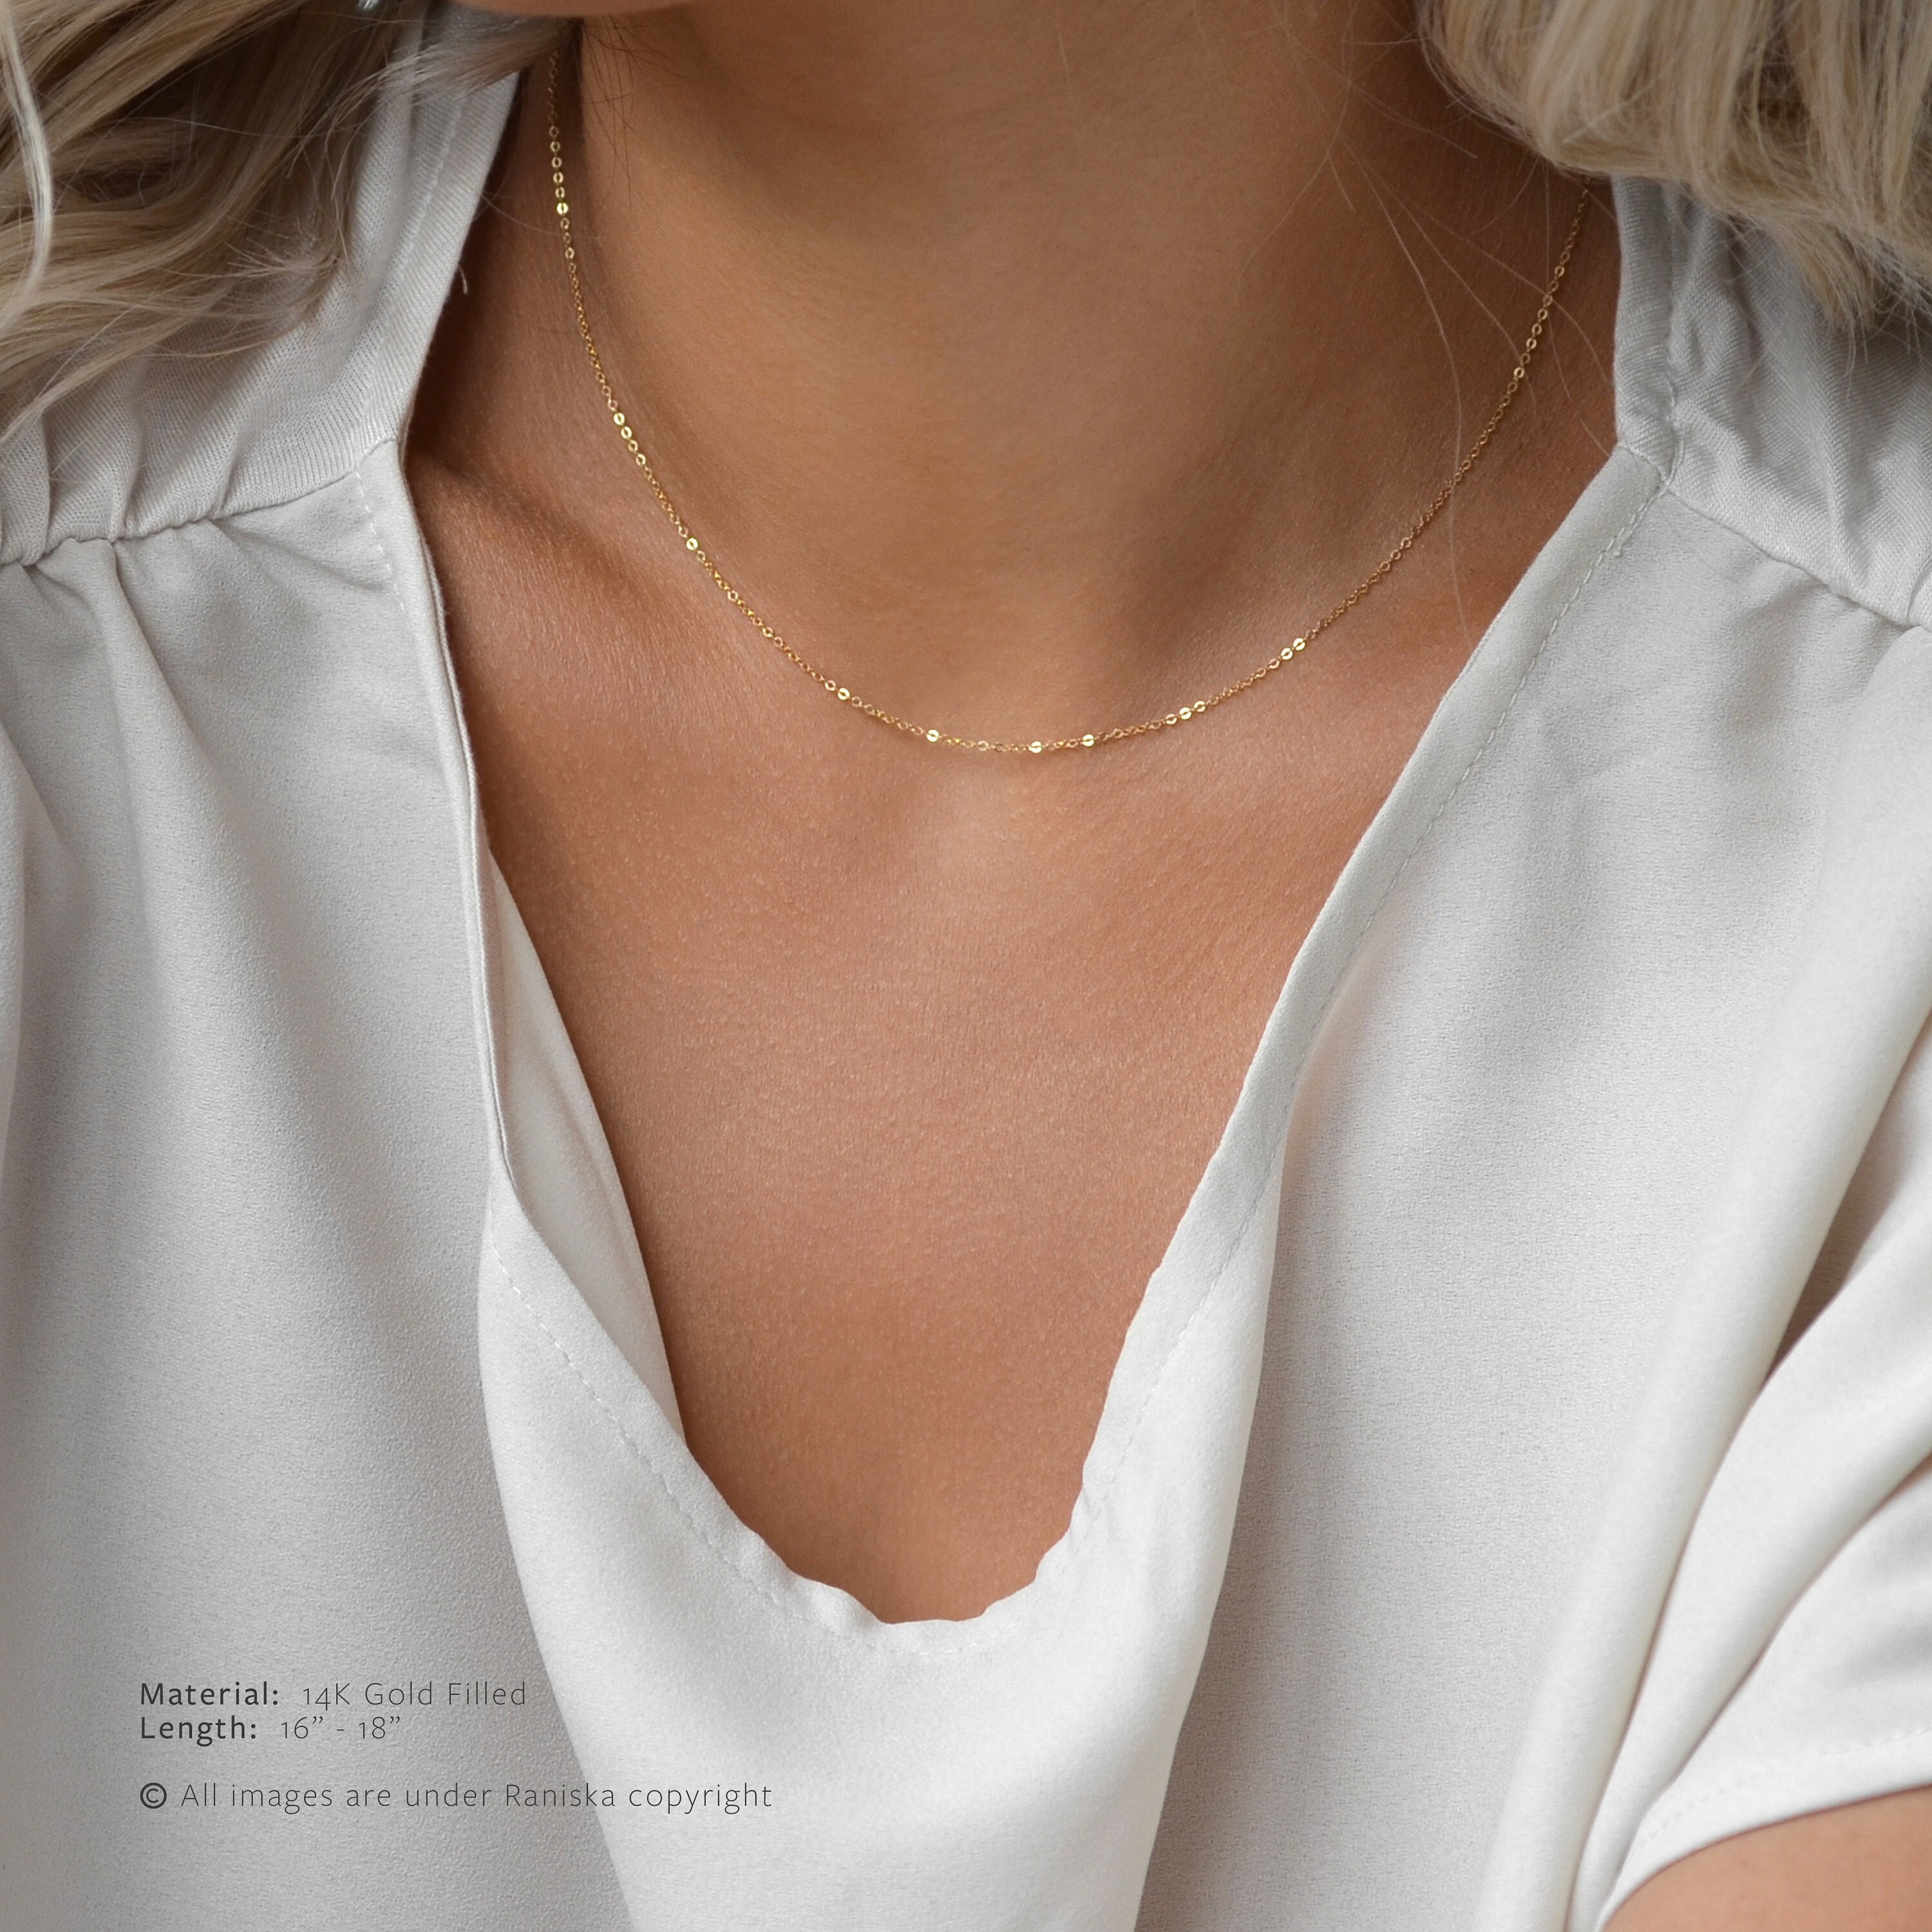 Thin Gold Chain 18K, Delicate Gold Chain Necklace, Simple Gold Chain Necklace, Dainty Gold Chain, Minimalist Gold Chain